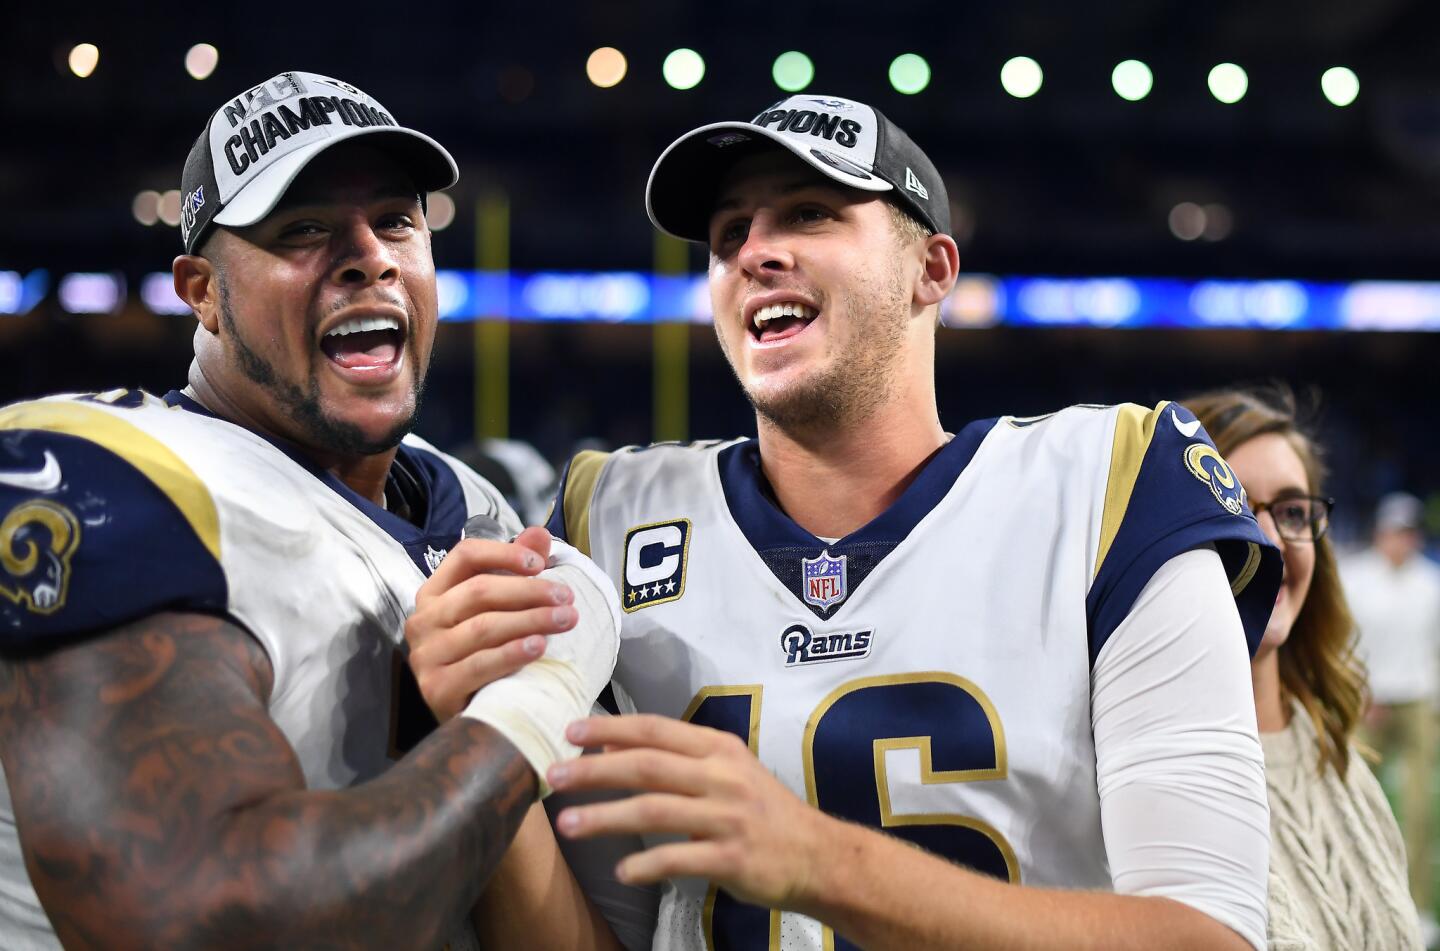 Rams gurd Rodger Saffold, left, and qaurterback Jared Goff celebrate after defeating the Detroit Lions at Ford Field in Detroit on Sunday.